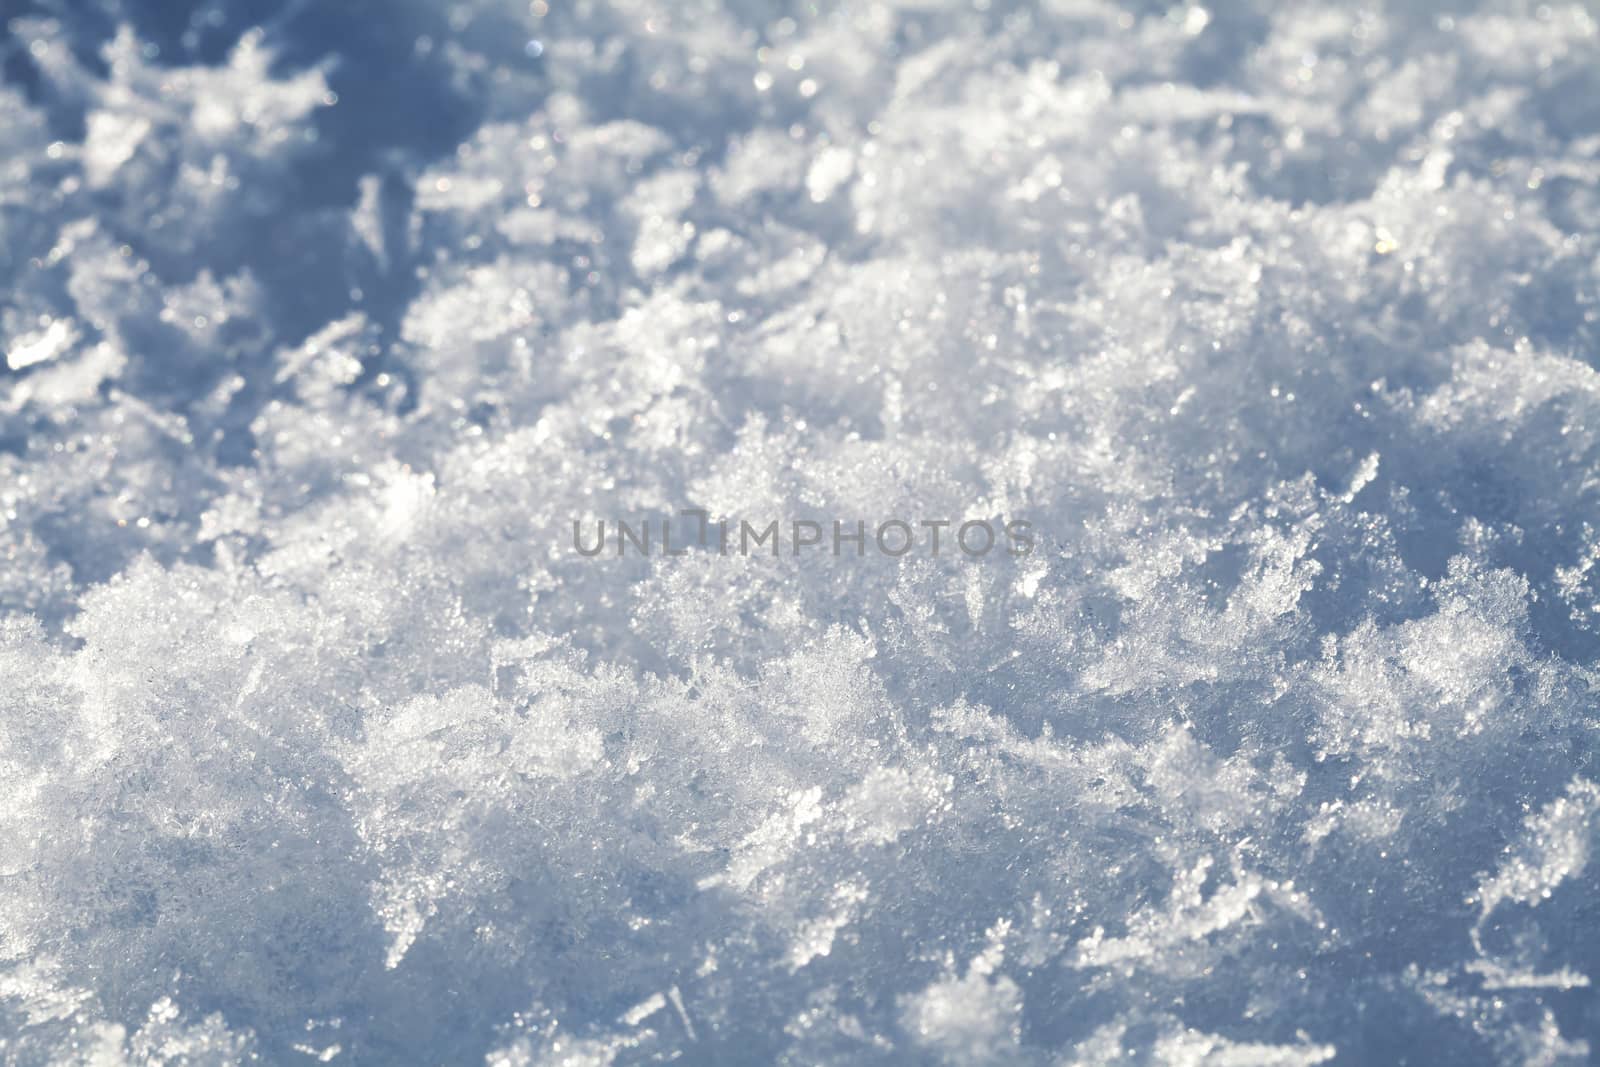 Snow crystals close-up by Goodday